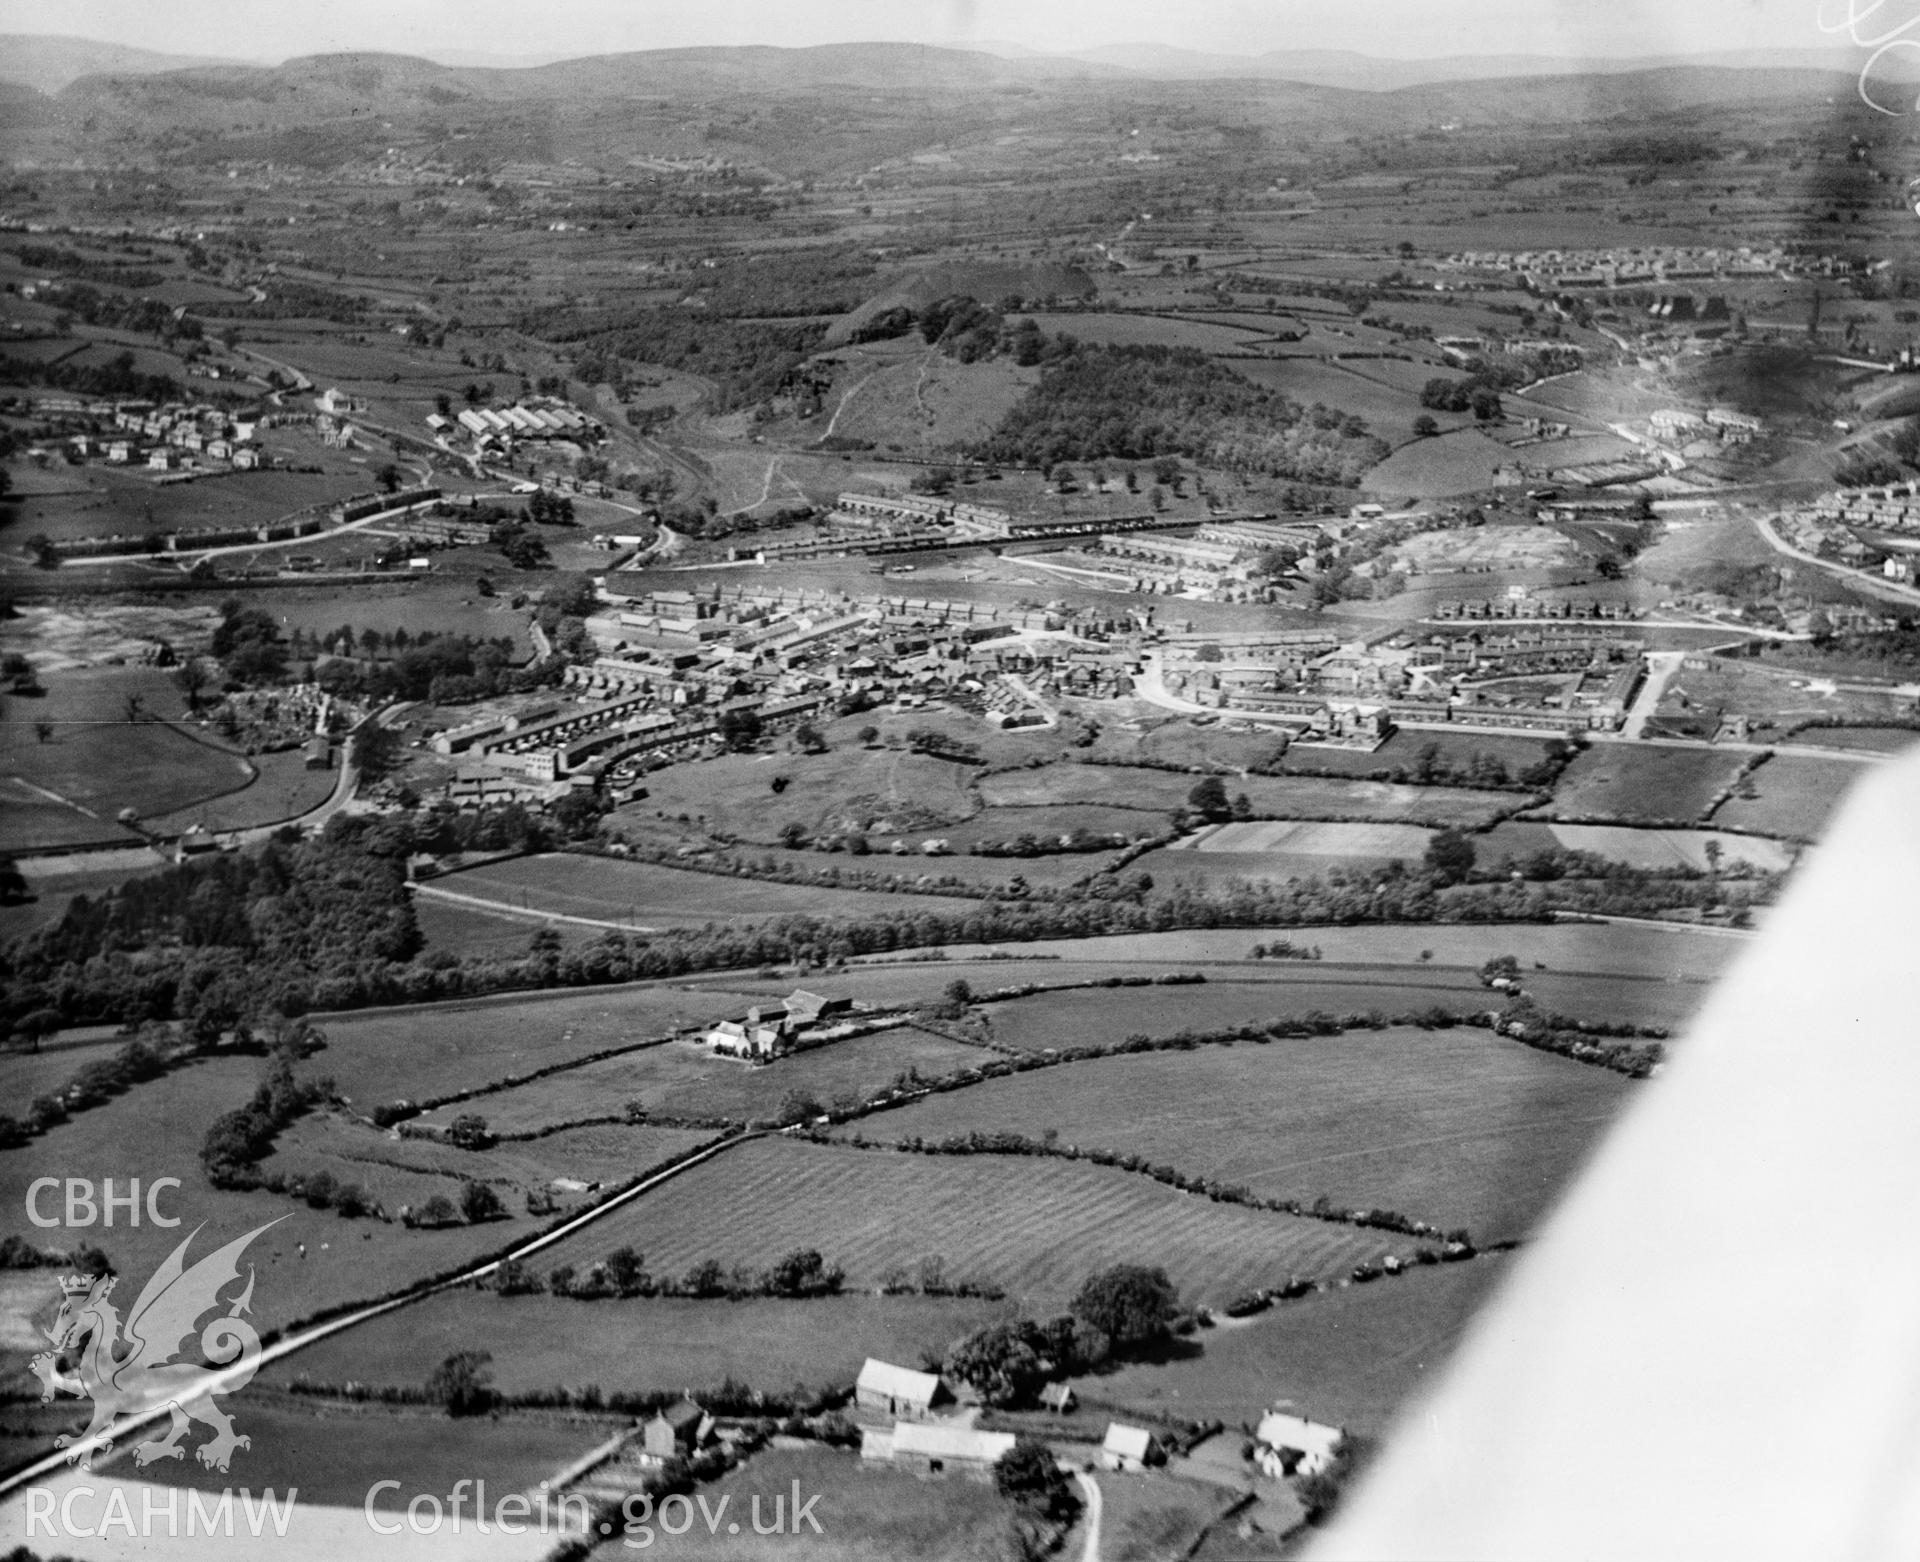 General view of Ystrad Mynach, oblique aerial view. 5?x4? black and white glass plate negative.